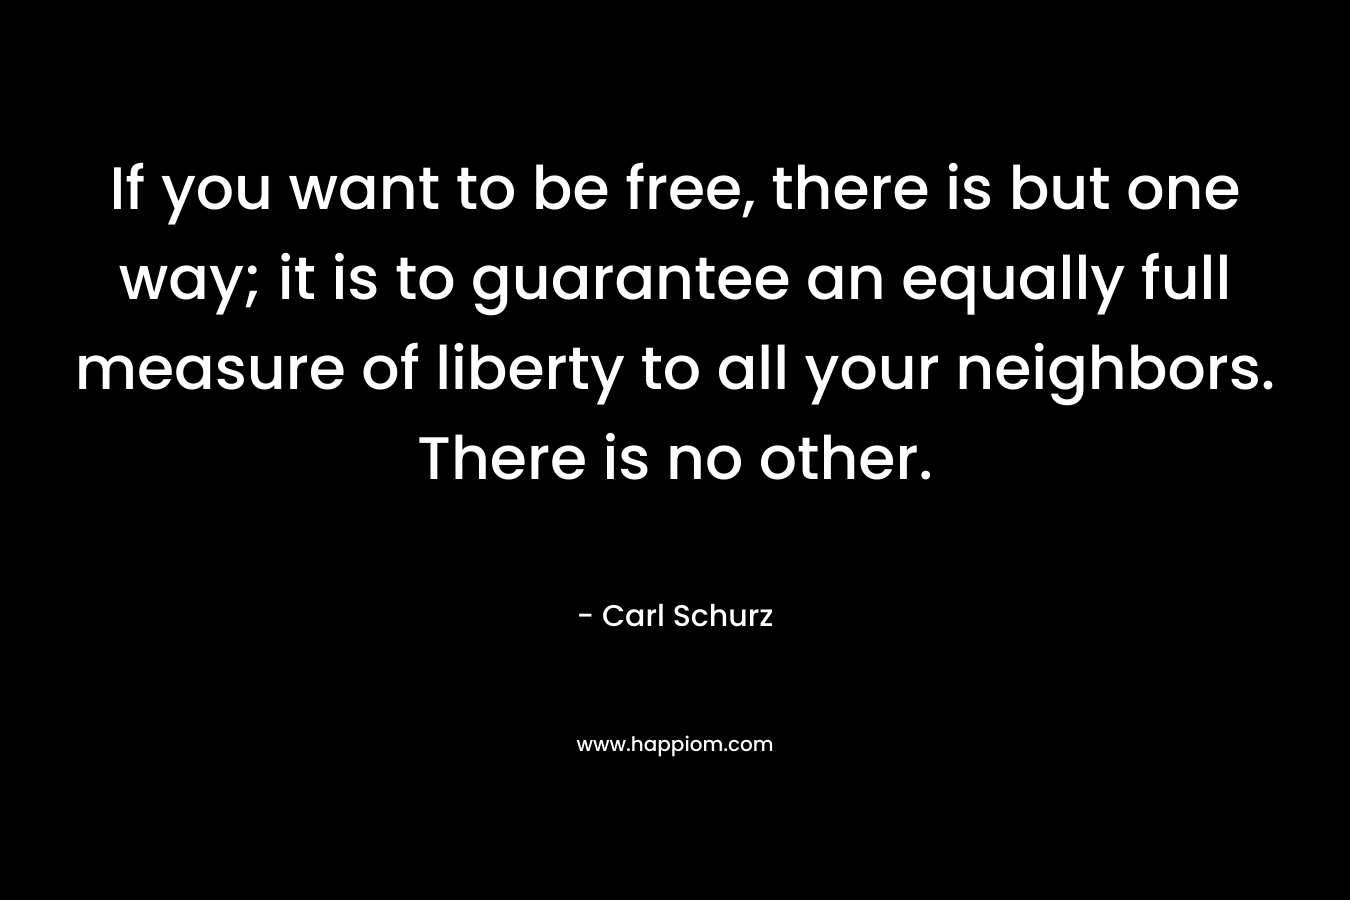 If you want to be free, there is but one way; it is to guarantee an equally full measure of liberty to all your neighbors. There is no other.